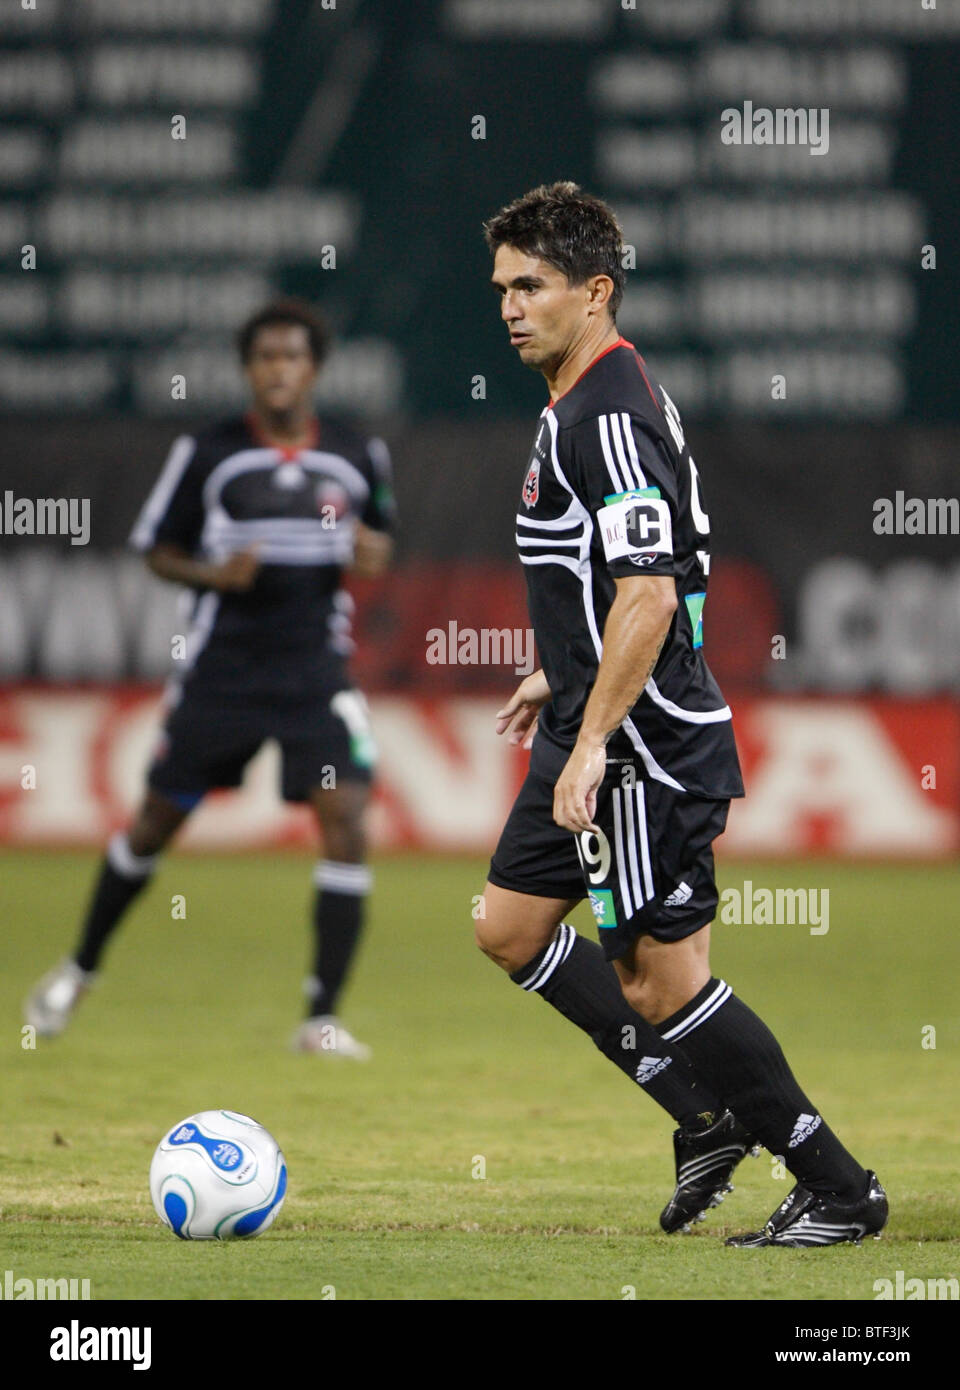 Jaime Moreno of DC United in action during a Major League Soccer match against Real Salt Lake September 9, 2006 Stock Photo